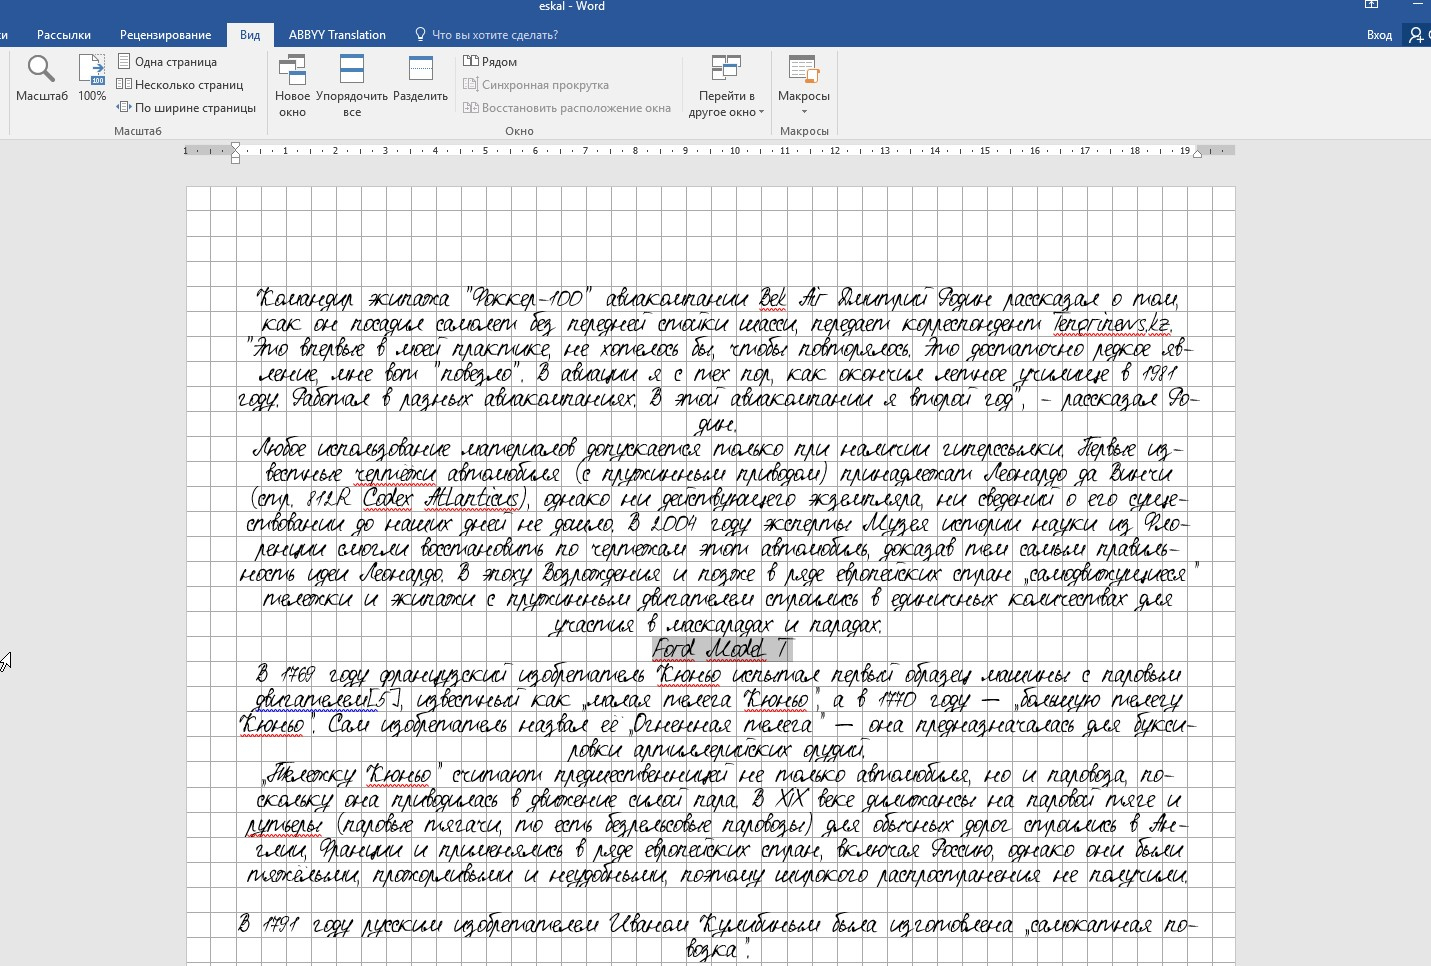 How To Print Microsoft Word&amp;#039;s Gridlines? - Super User